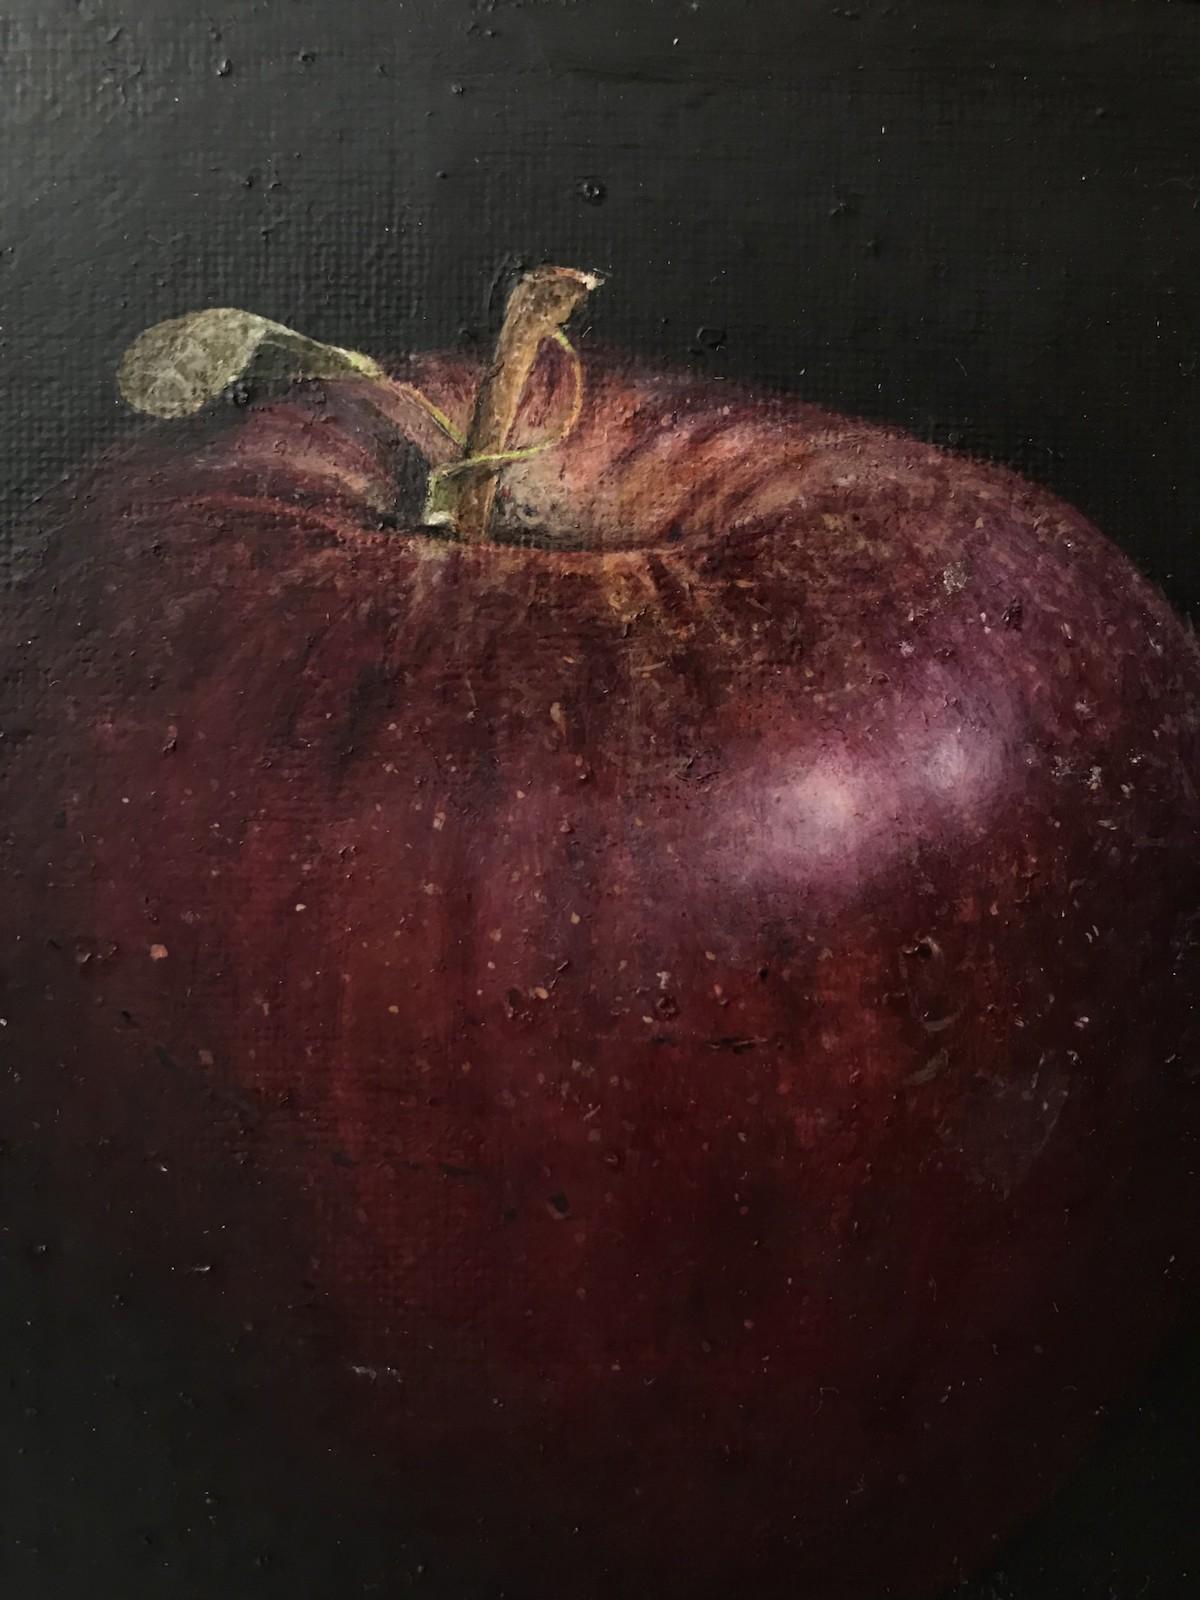 Deep Red Apple by Dani Humberstone [2022]
original and hand signed by the artist 
Oil on Canvas
Image size: H:15 cm x W:15 cm
Complete Size of Unframed Work: H:15 cm x W:15 cm x D:2cm
Frame Size: H:31 cm x W:31 cm x D:4cm
Sold Framed
Please note